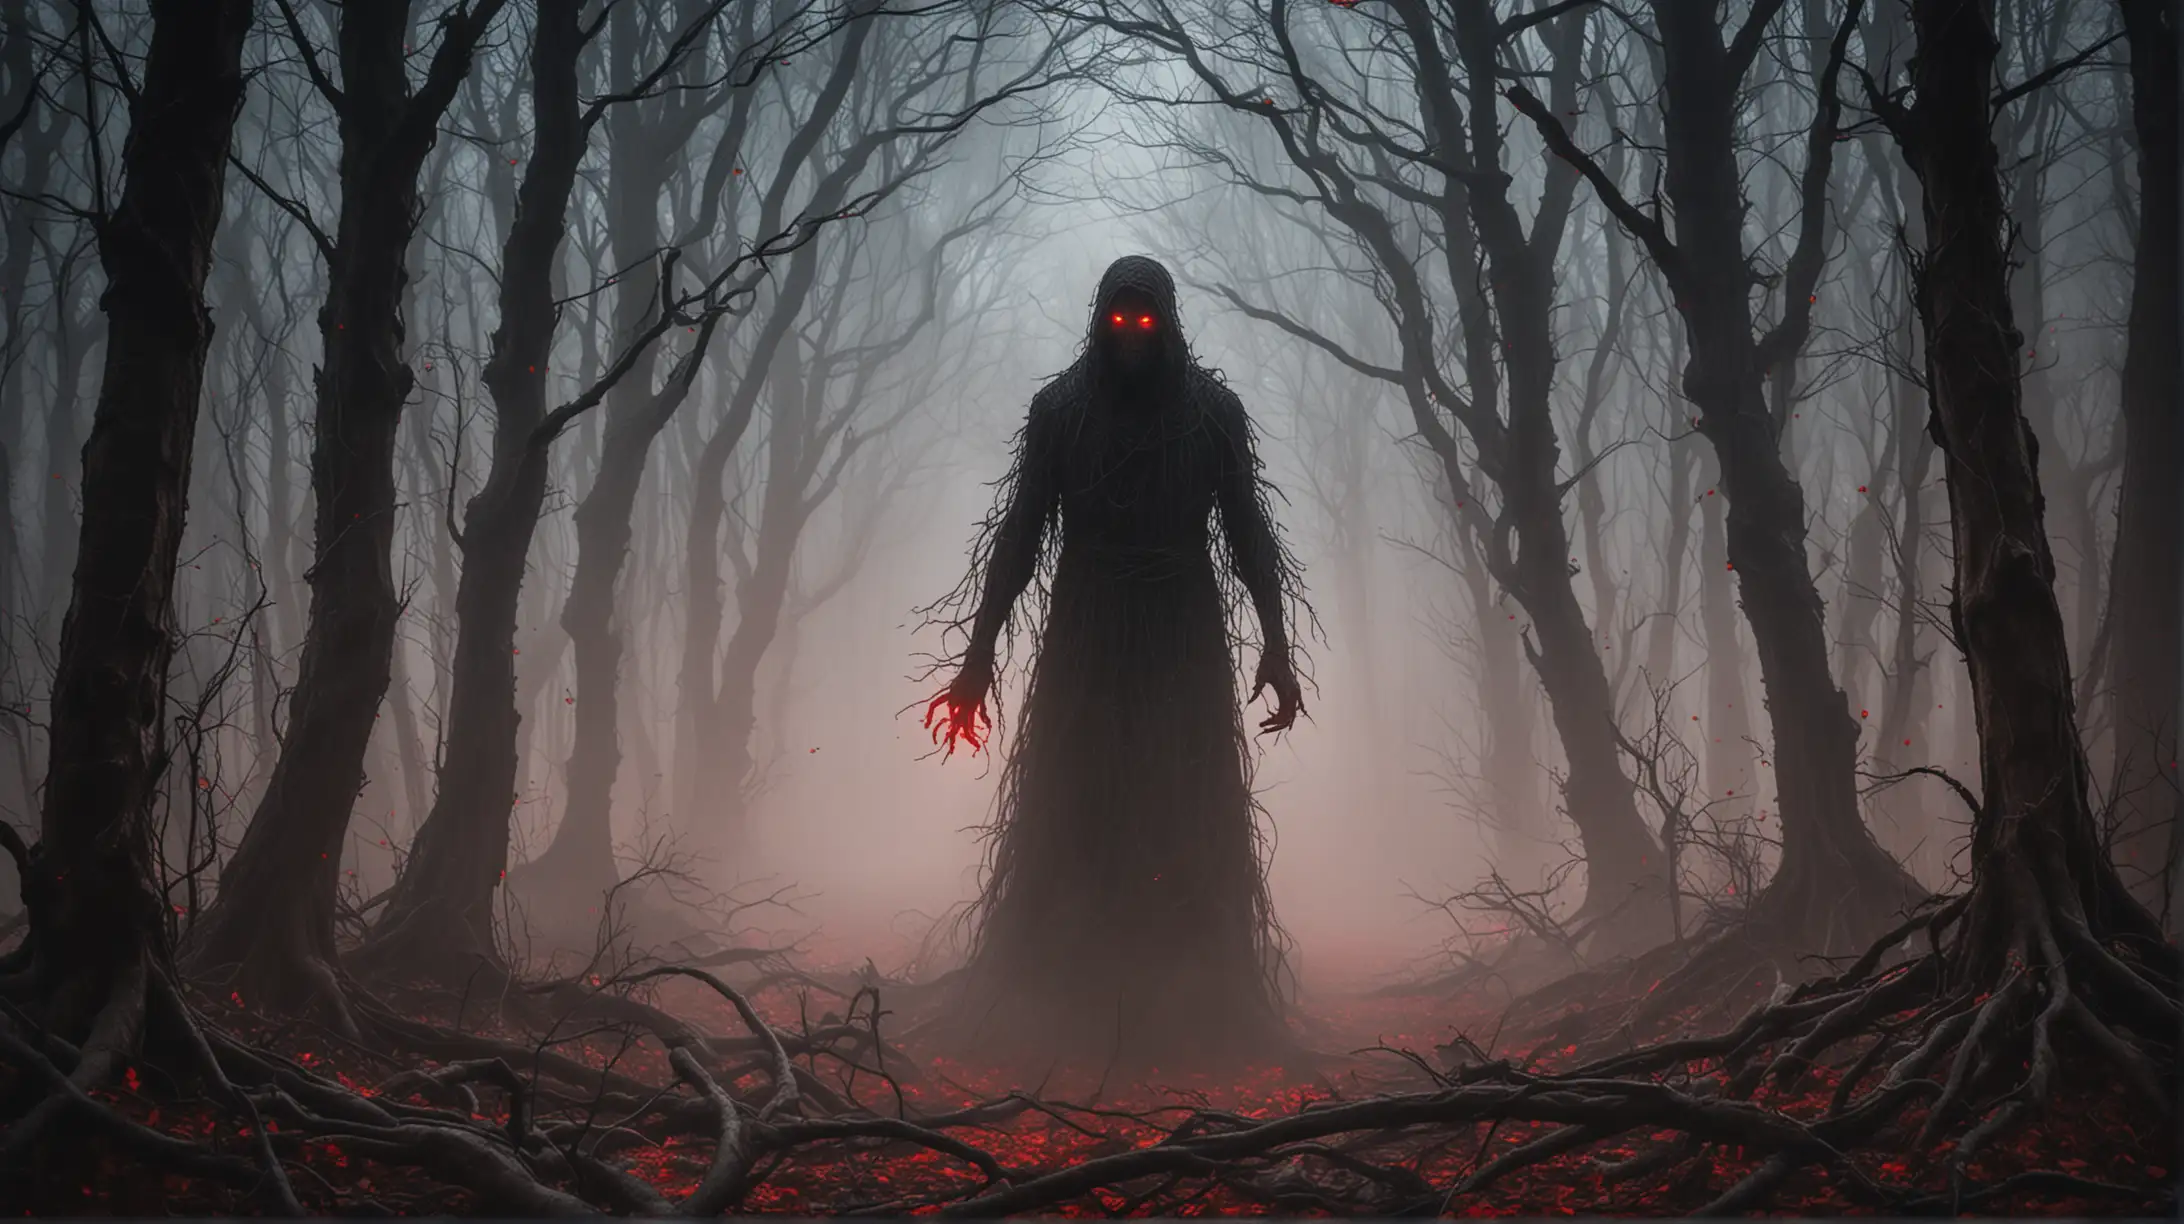 Sinister Shadowy Figure with Glowing Red Eyes in Eerie Mist and Twisted Trees